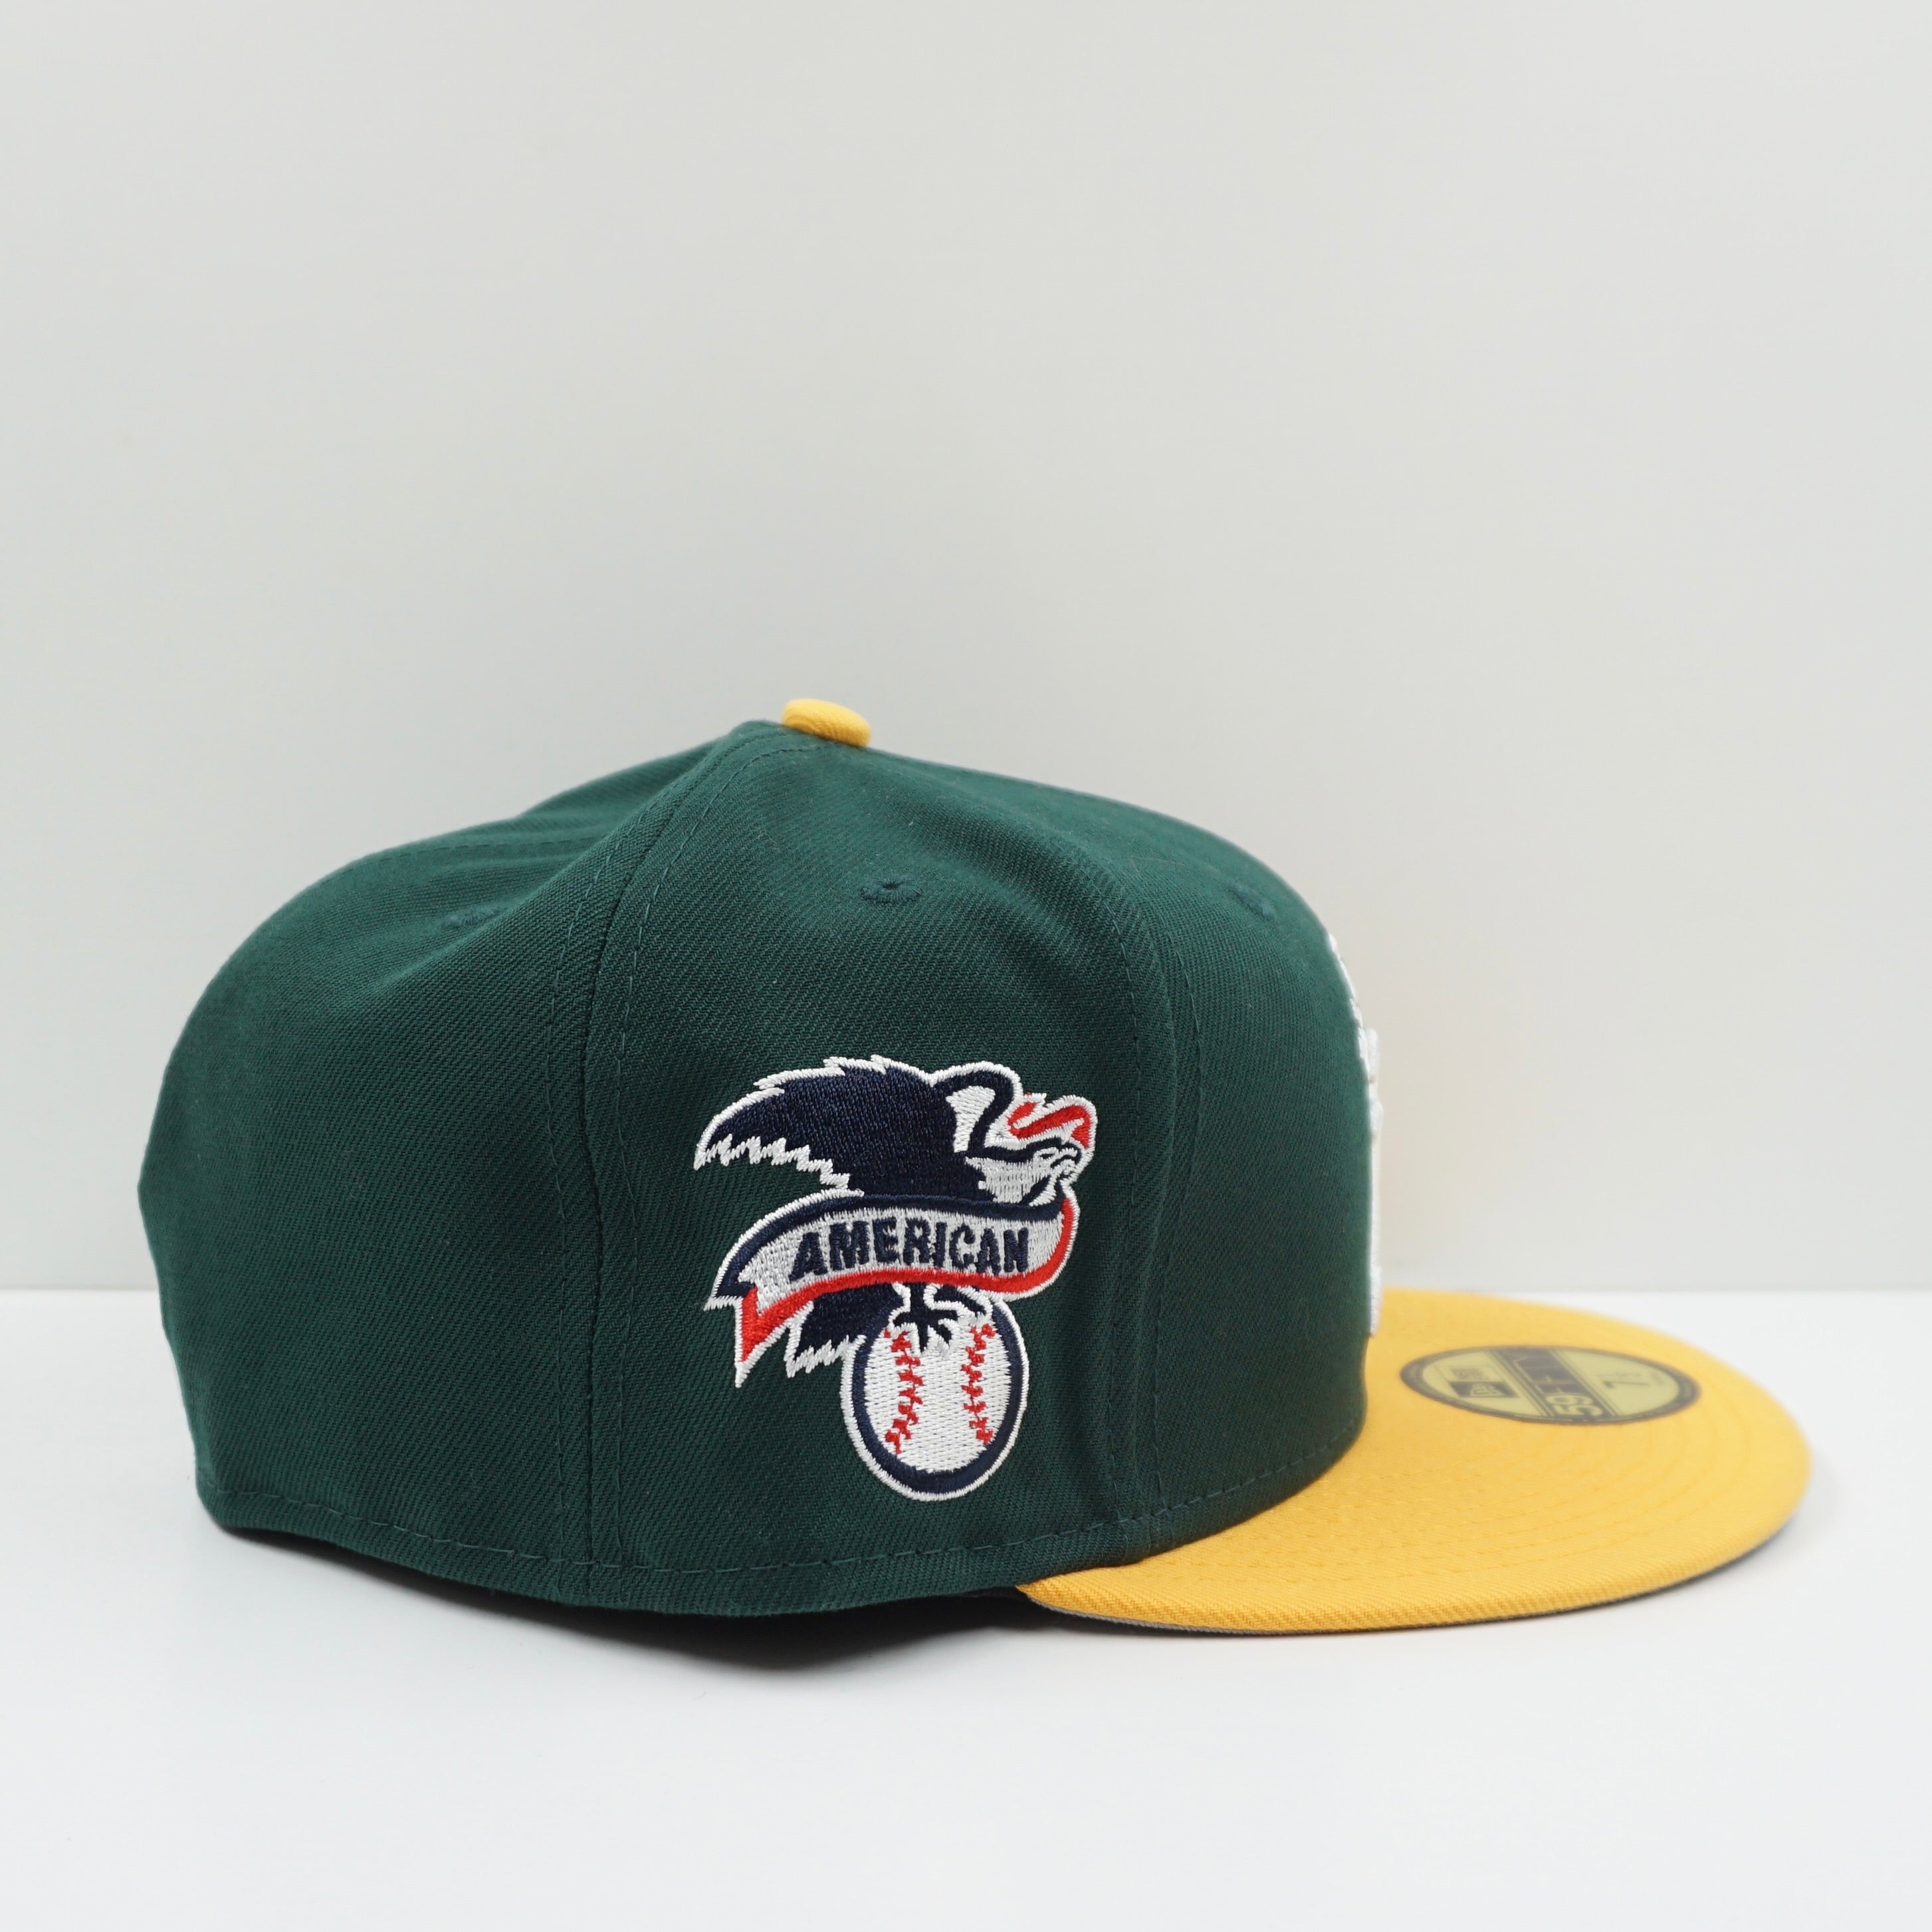 New Era West Oakland A's Fitted Cap